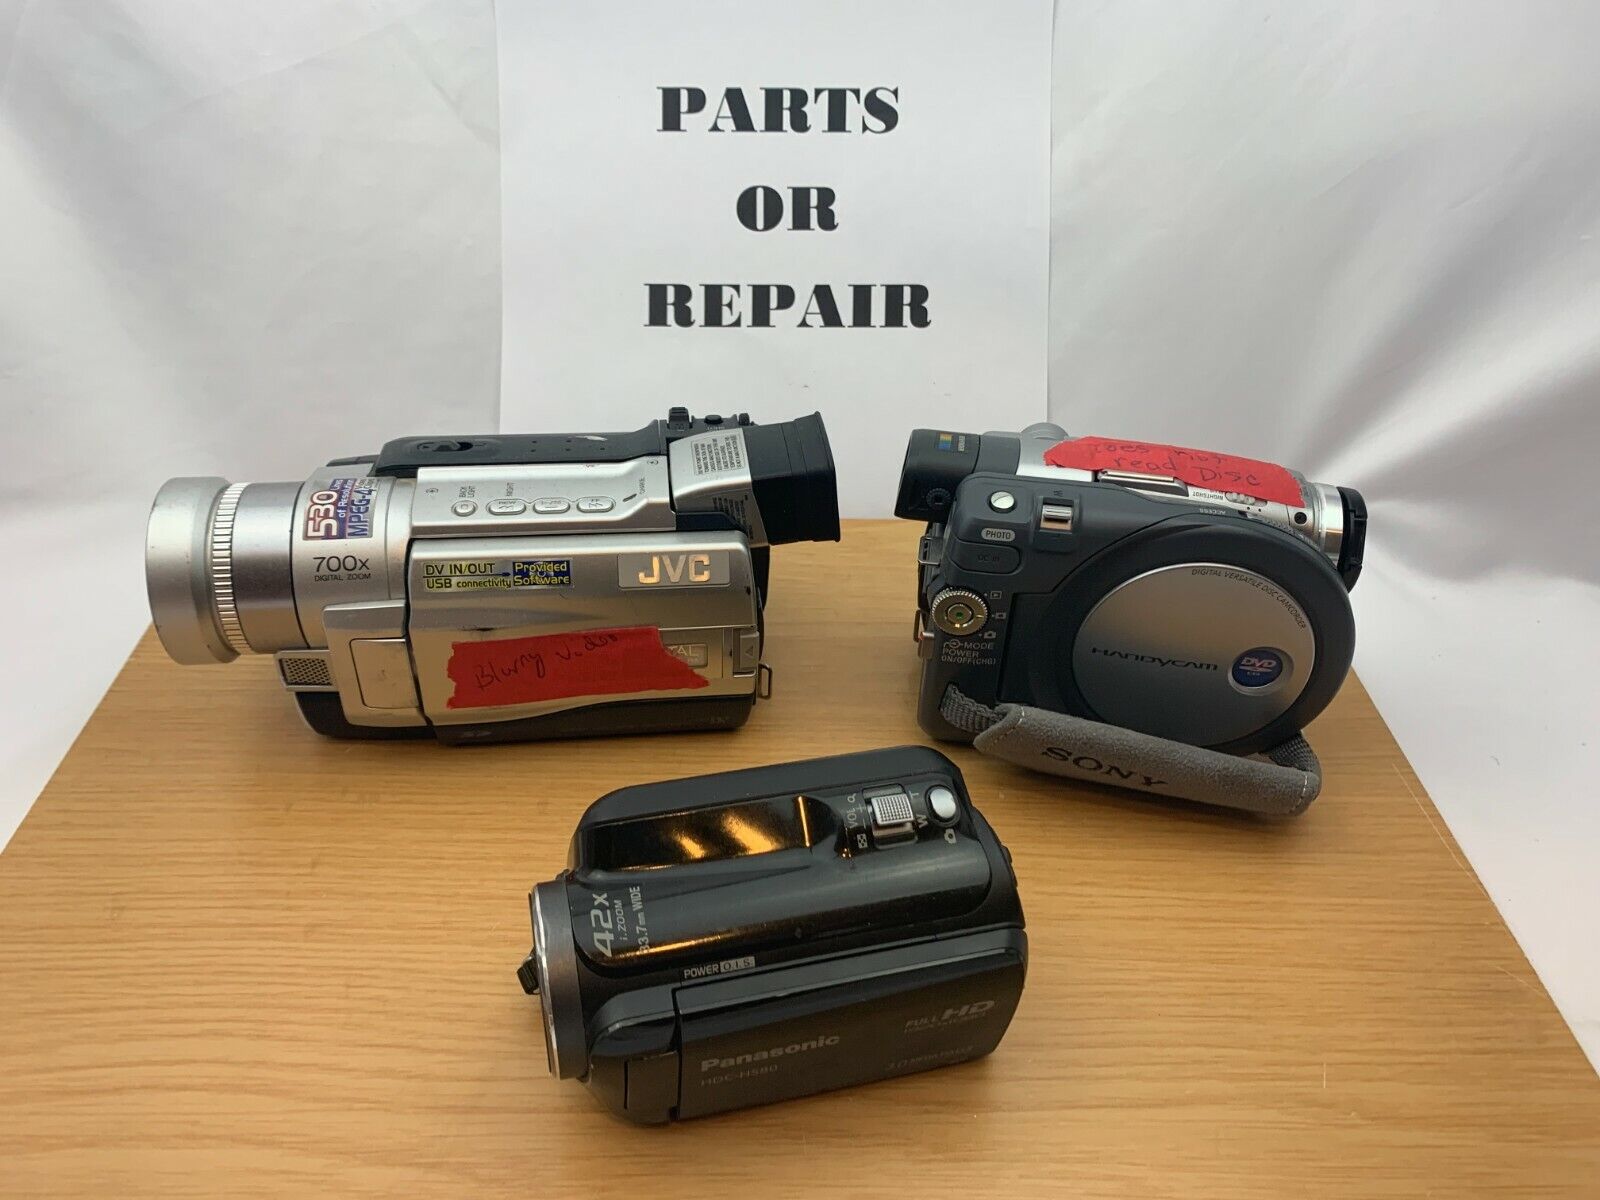  Camcorder Lot of 3 Sony Handycam, JVC, Panasonic Mixed Cams Parts or Repair Sony